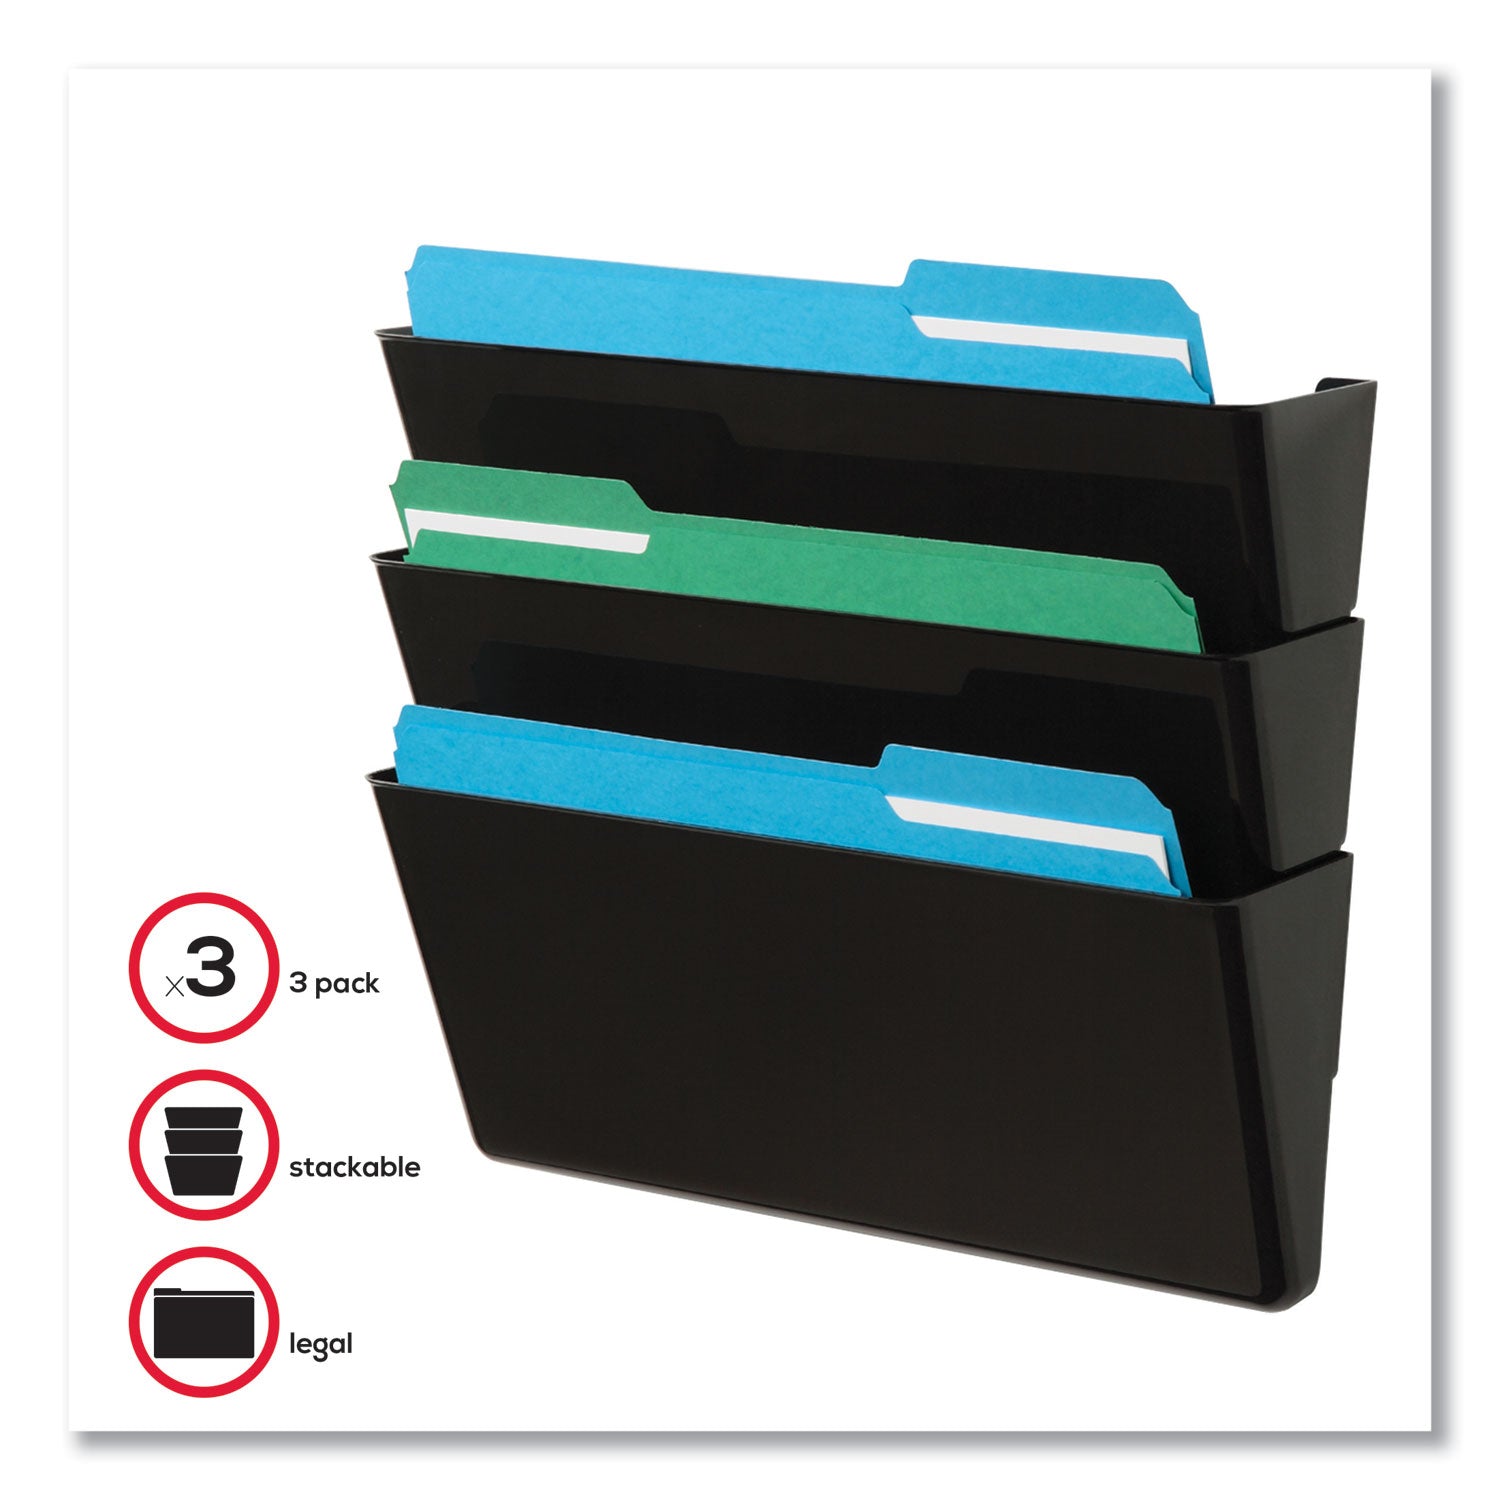 ez-link-stackable-docupocket-3-sections-legal-size-1625-x-4-x-19-black-ships-in-4-6-business-days_def74104 - 4